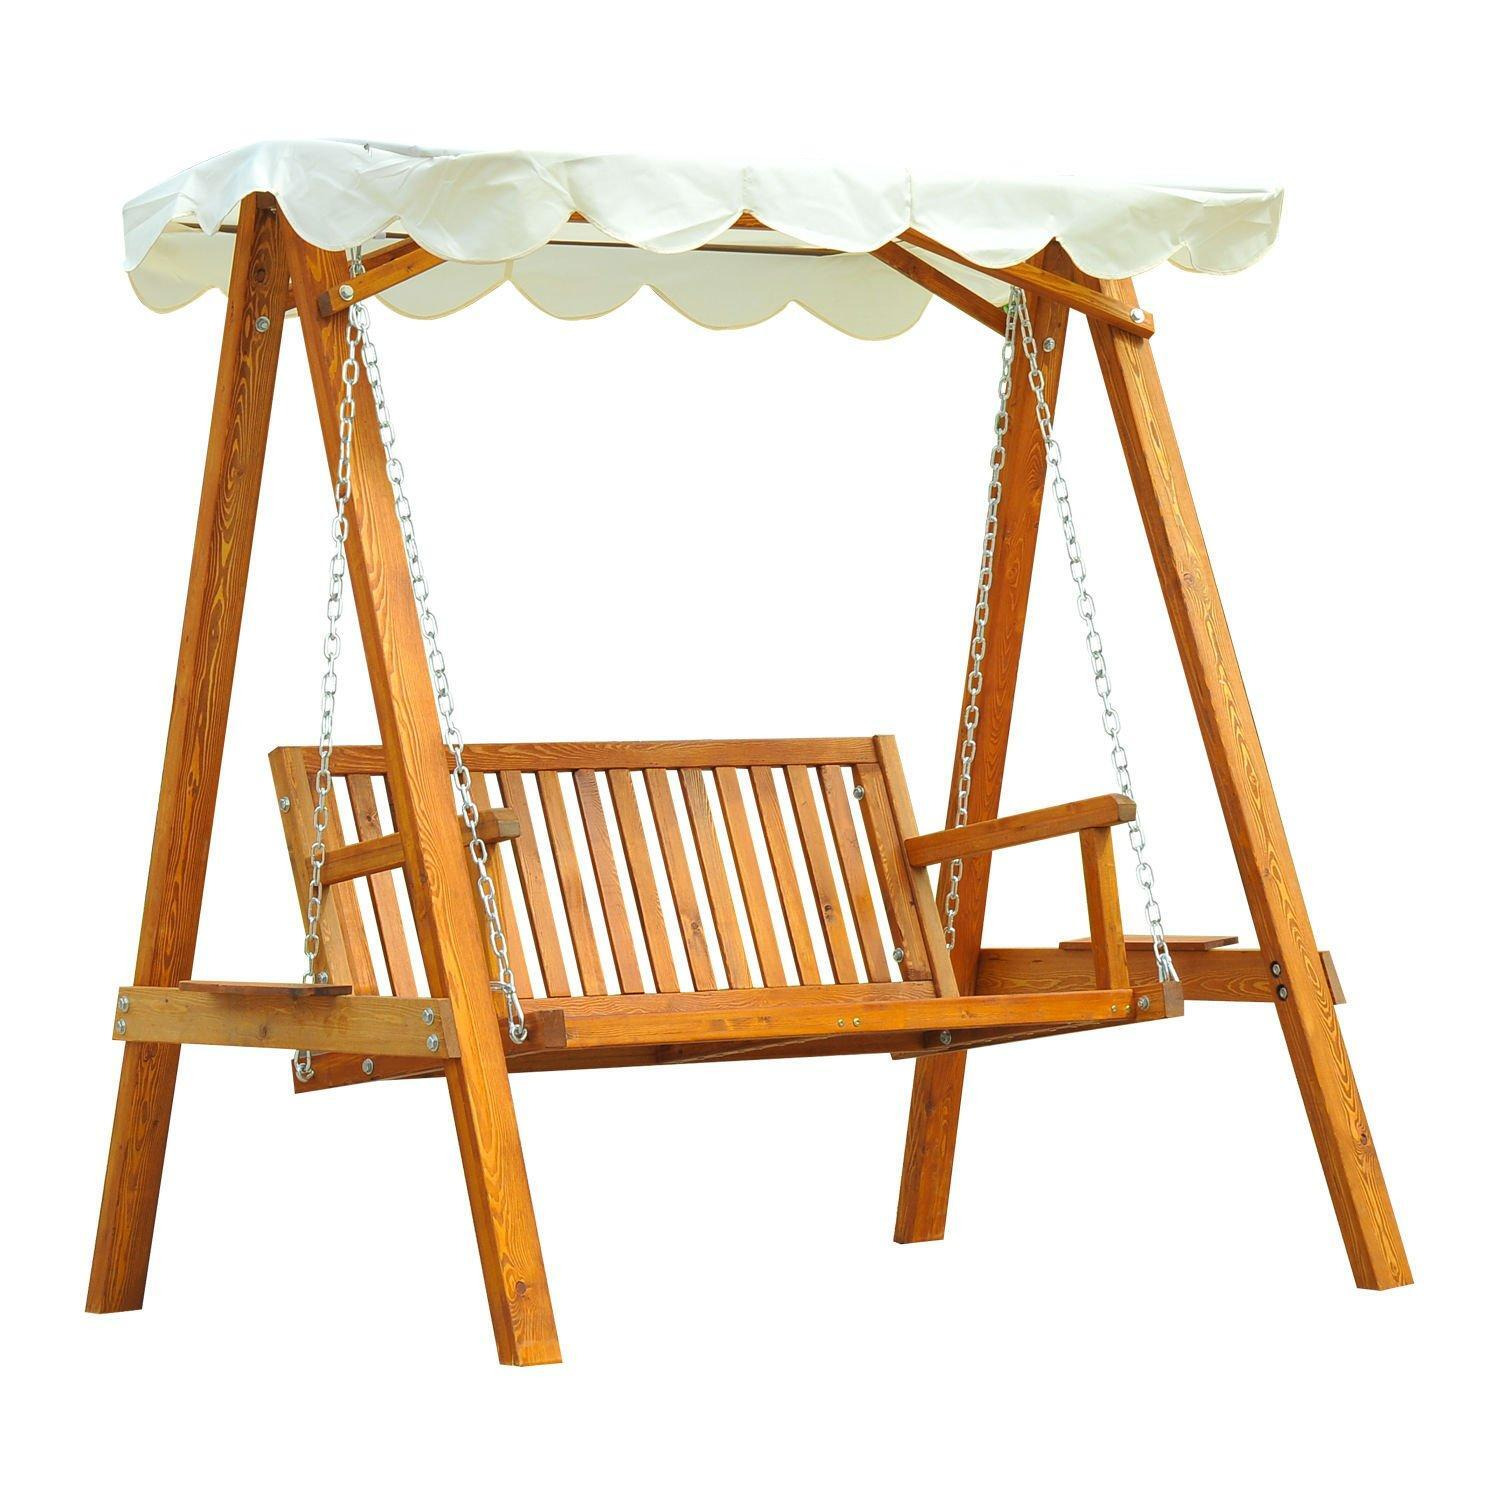 2 Seater Wooden Garden Swing Chair Seat Hammock Bench  Lounger - image 1